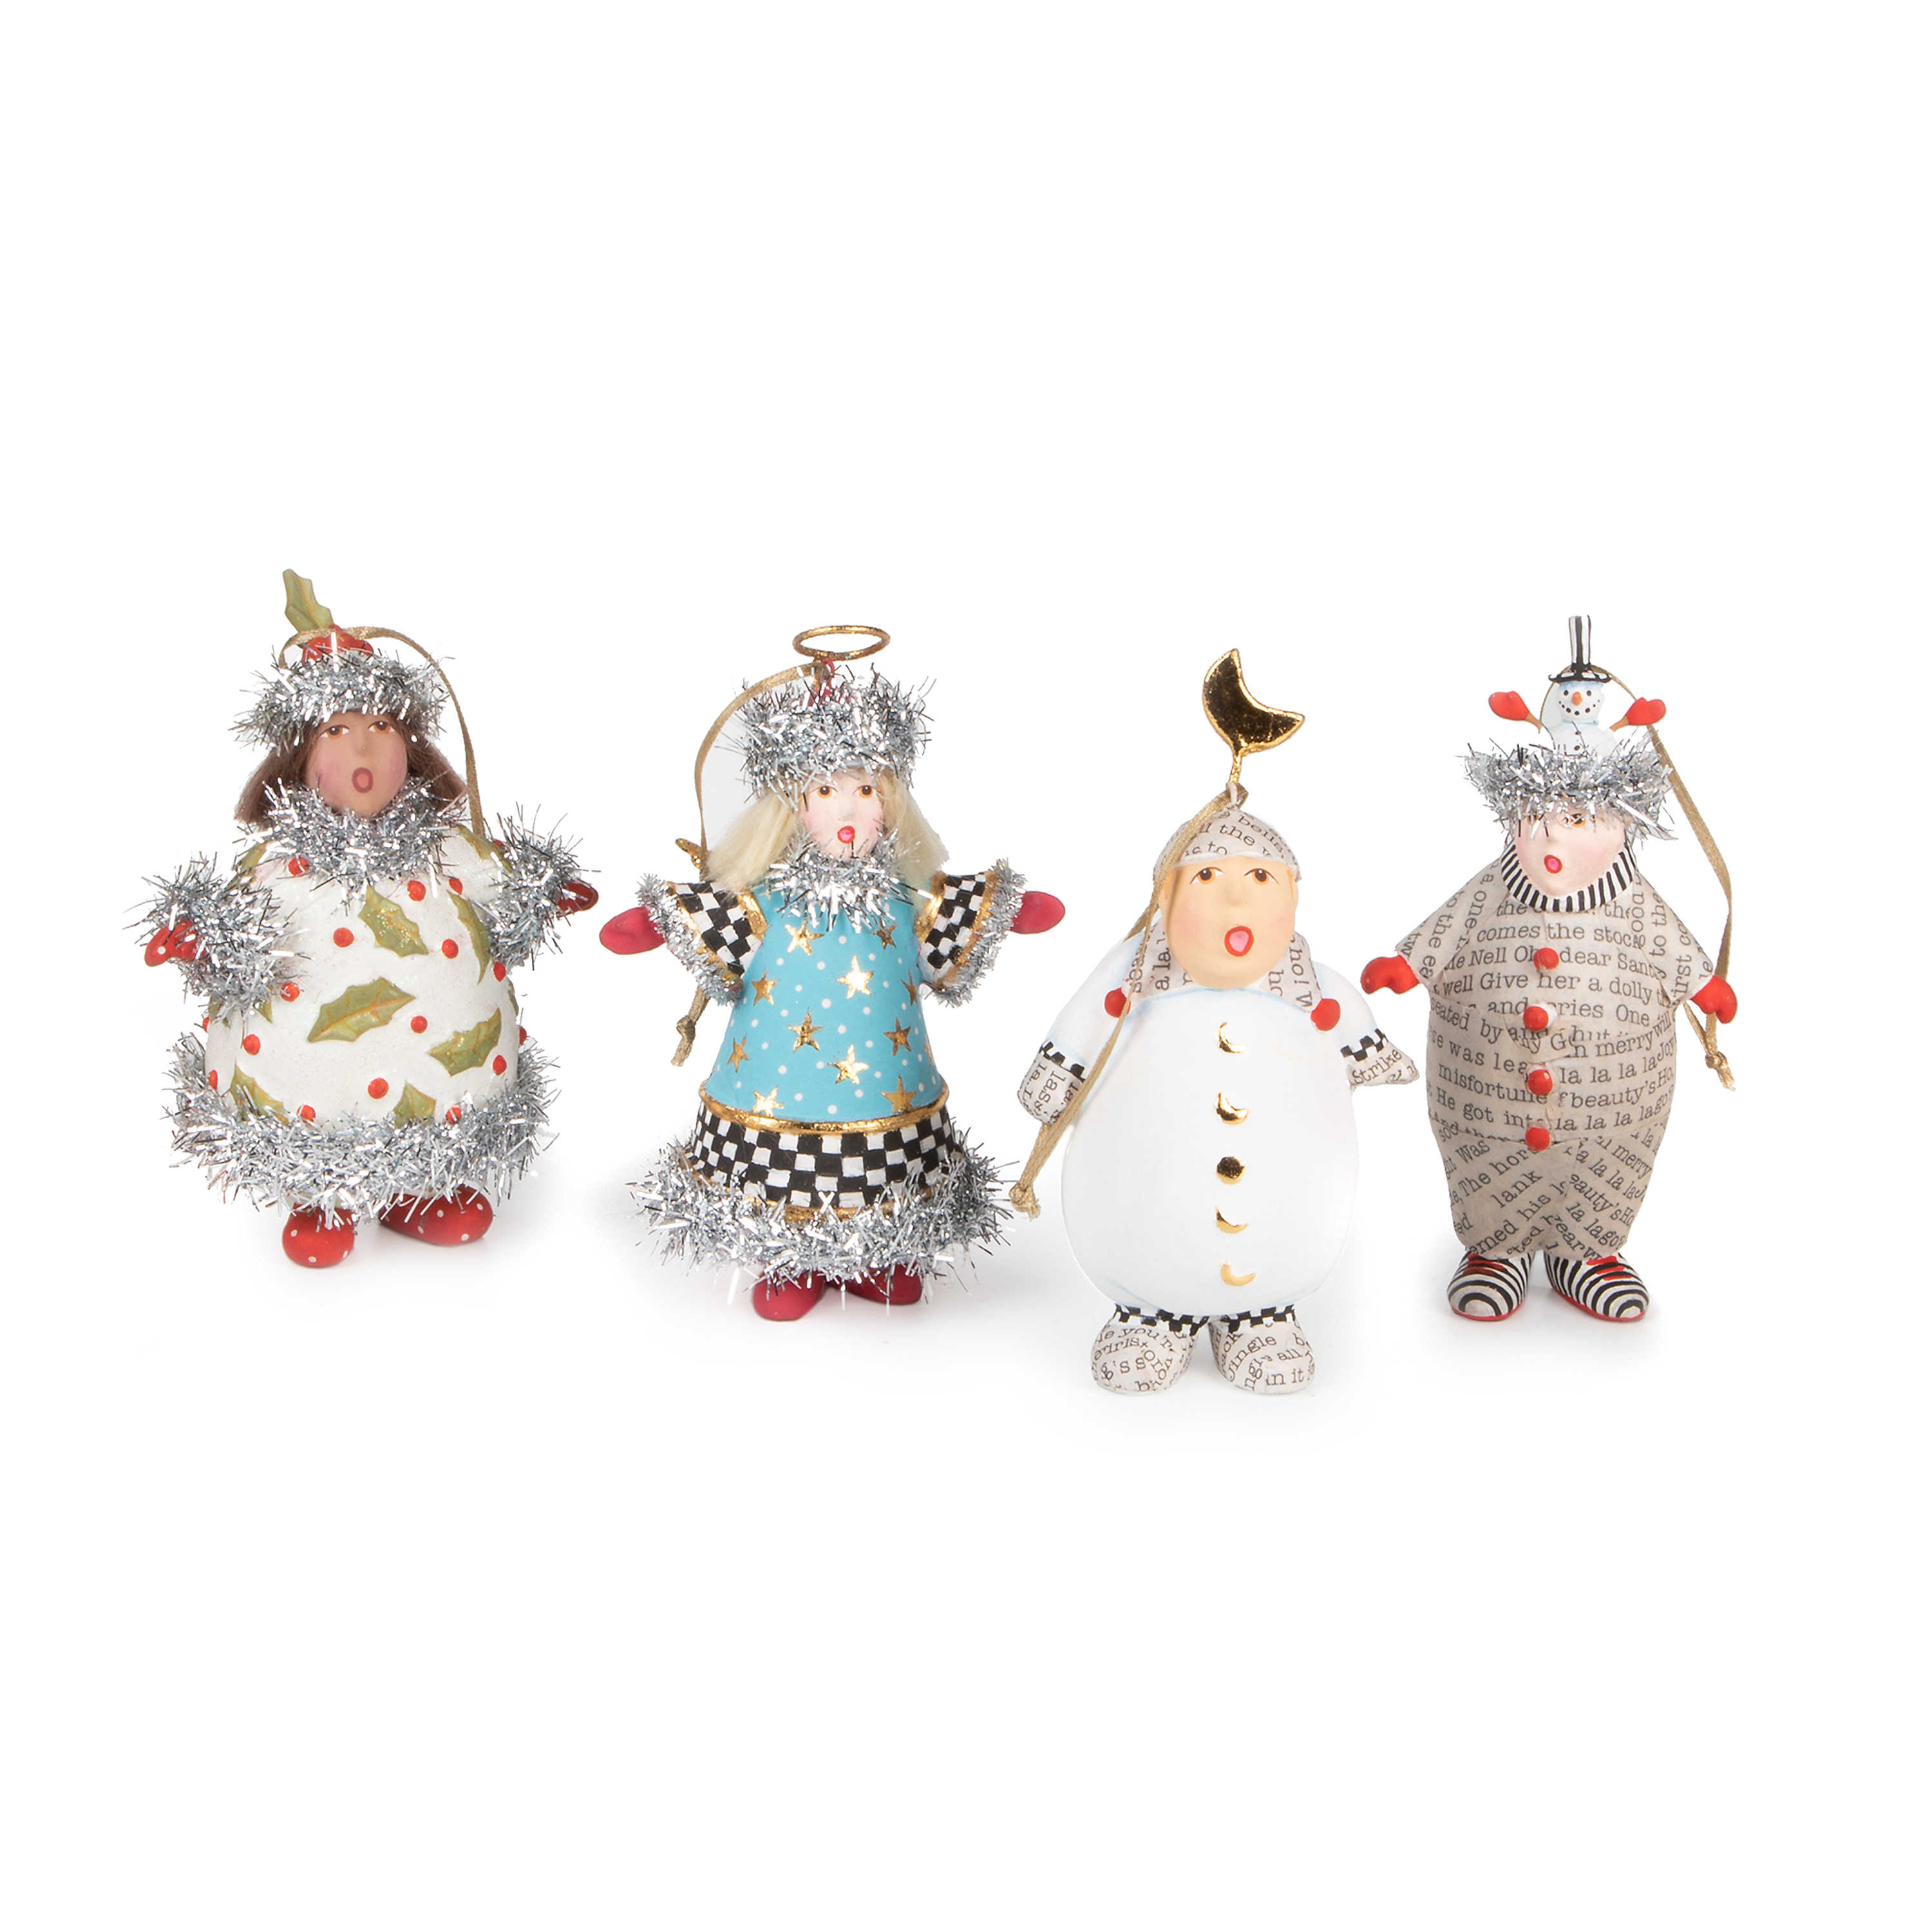 Patience Brewster Holiday Caroler Ornaments, Set of 4 mackenzie-childs Panama 0